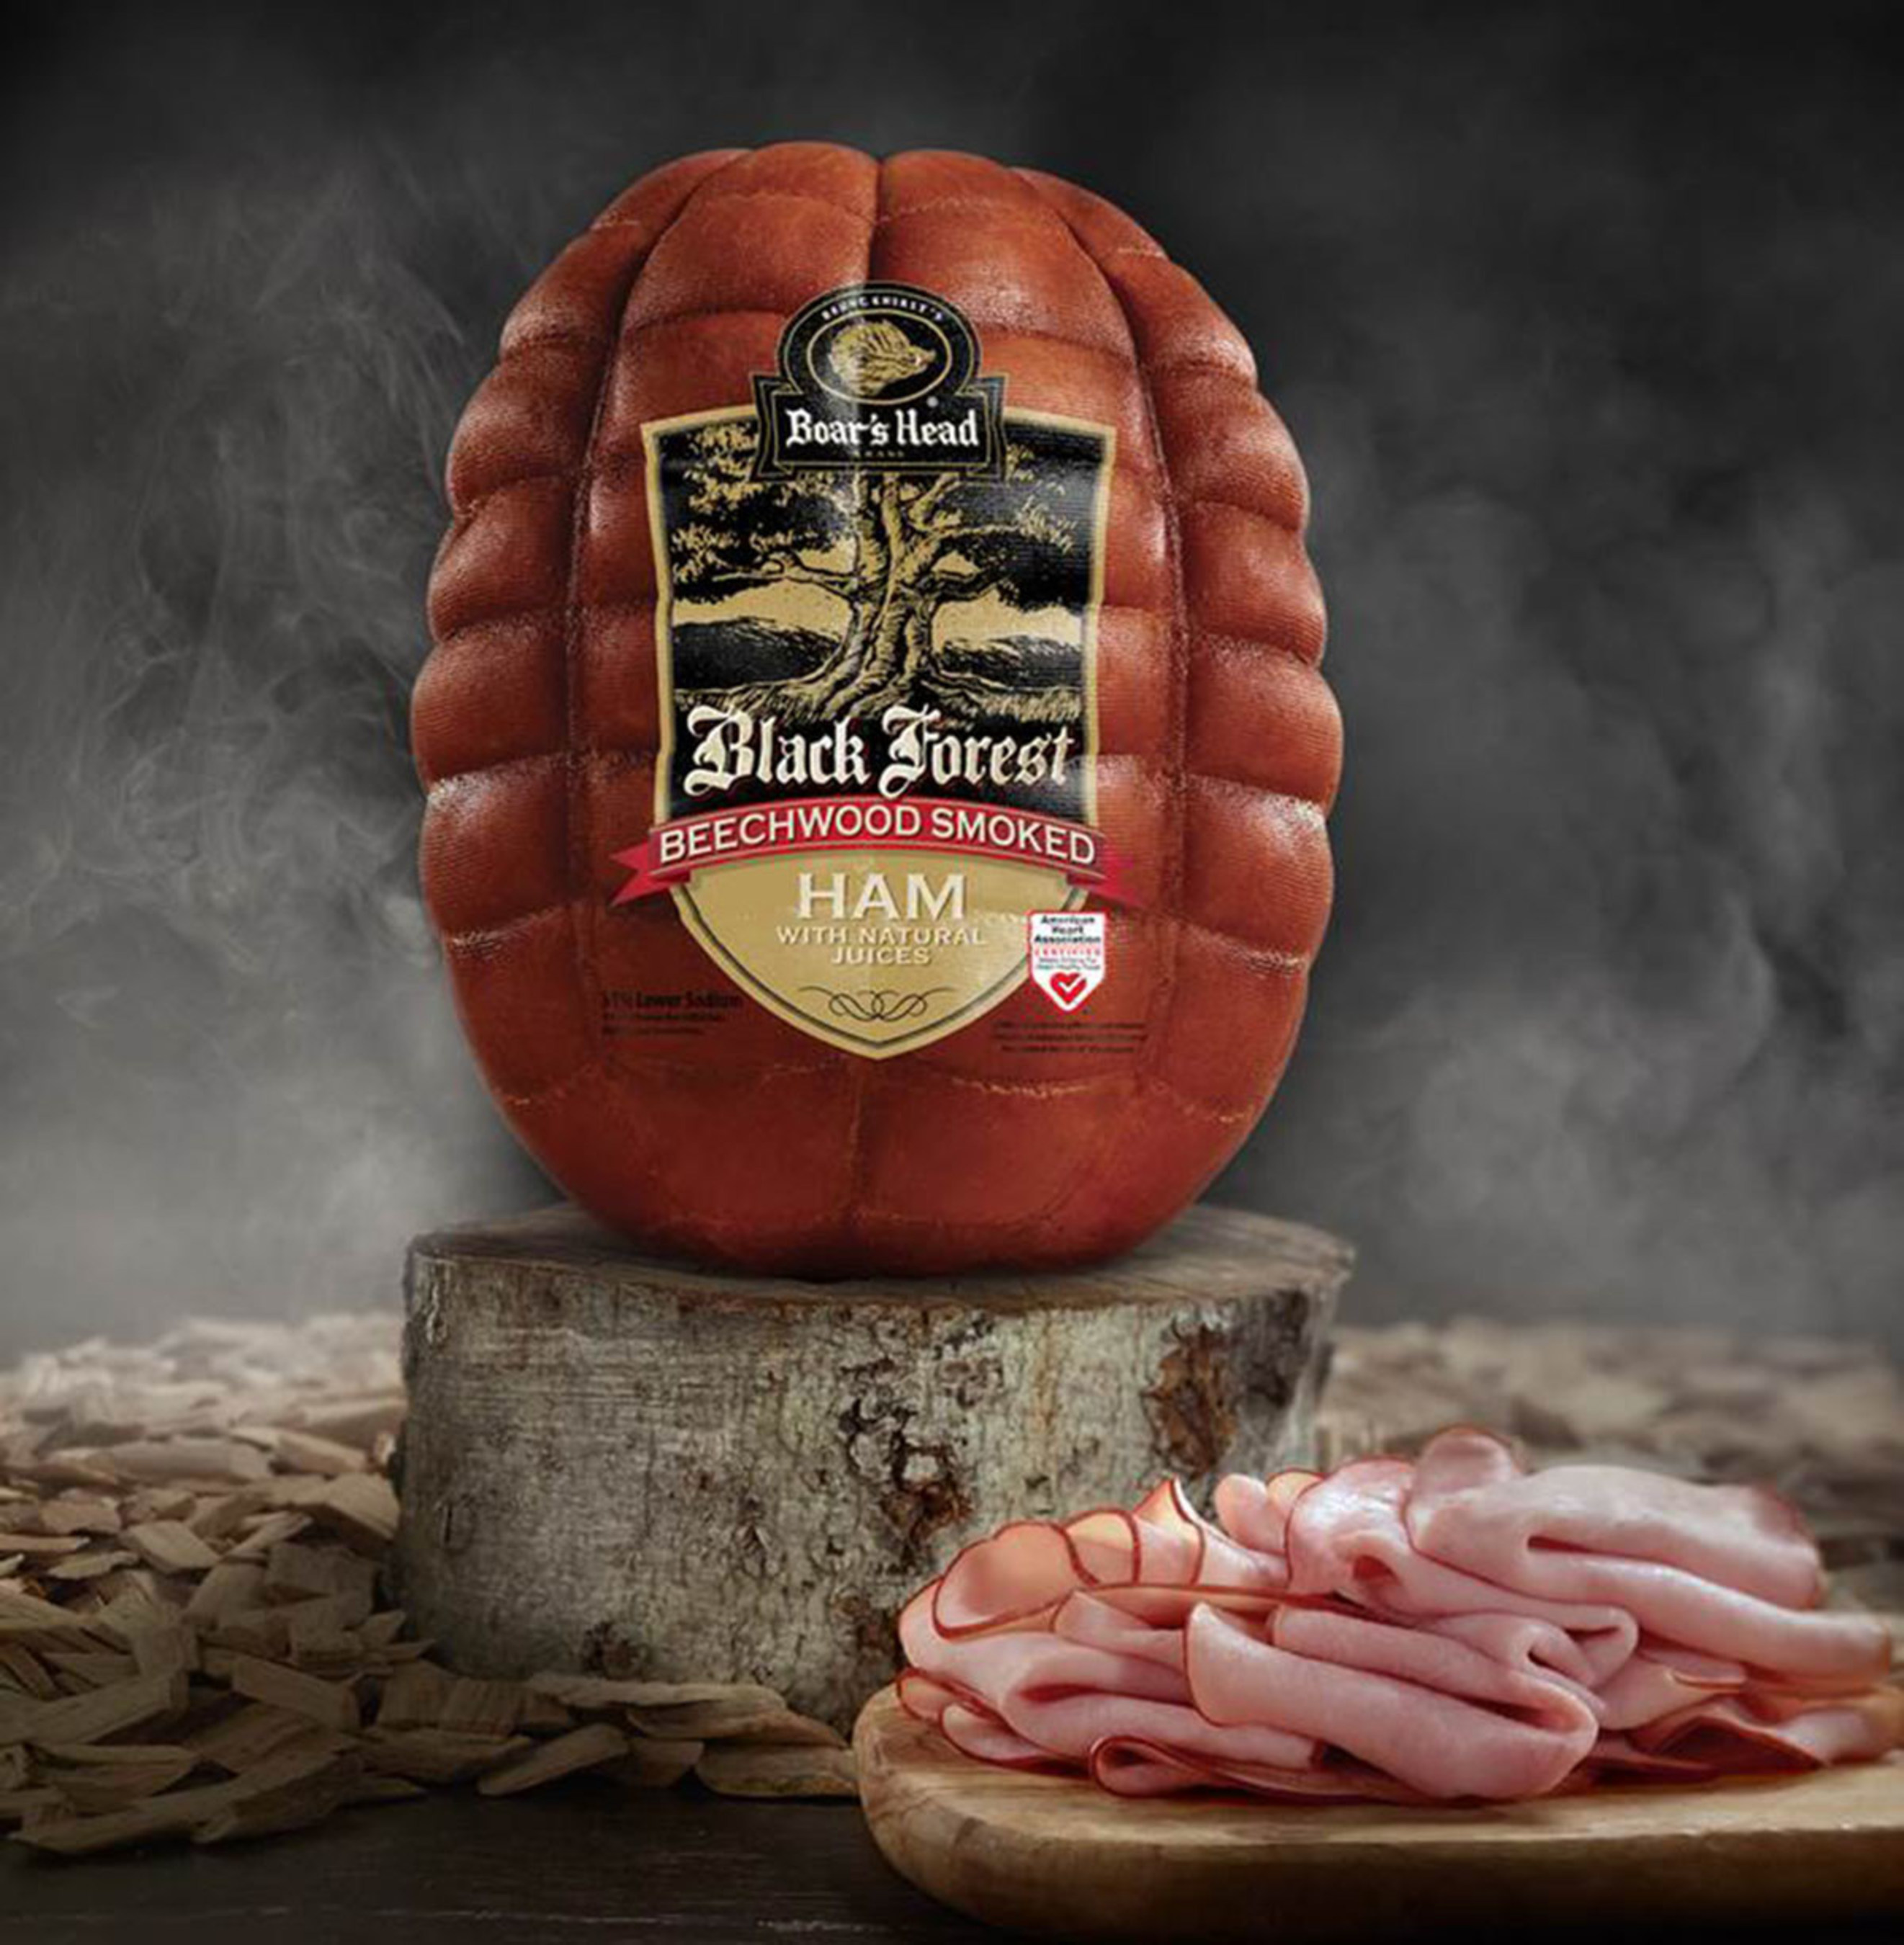 Boar's Head Teams Up with Celebrity Chef Richard Blais to Introduce Black Forest Beechwood Smoked Ham